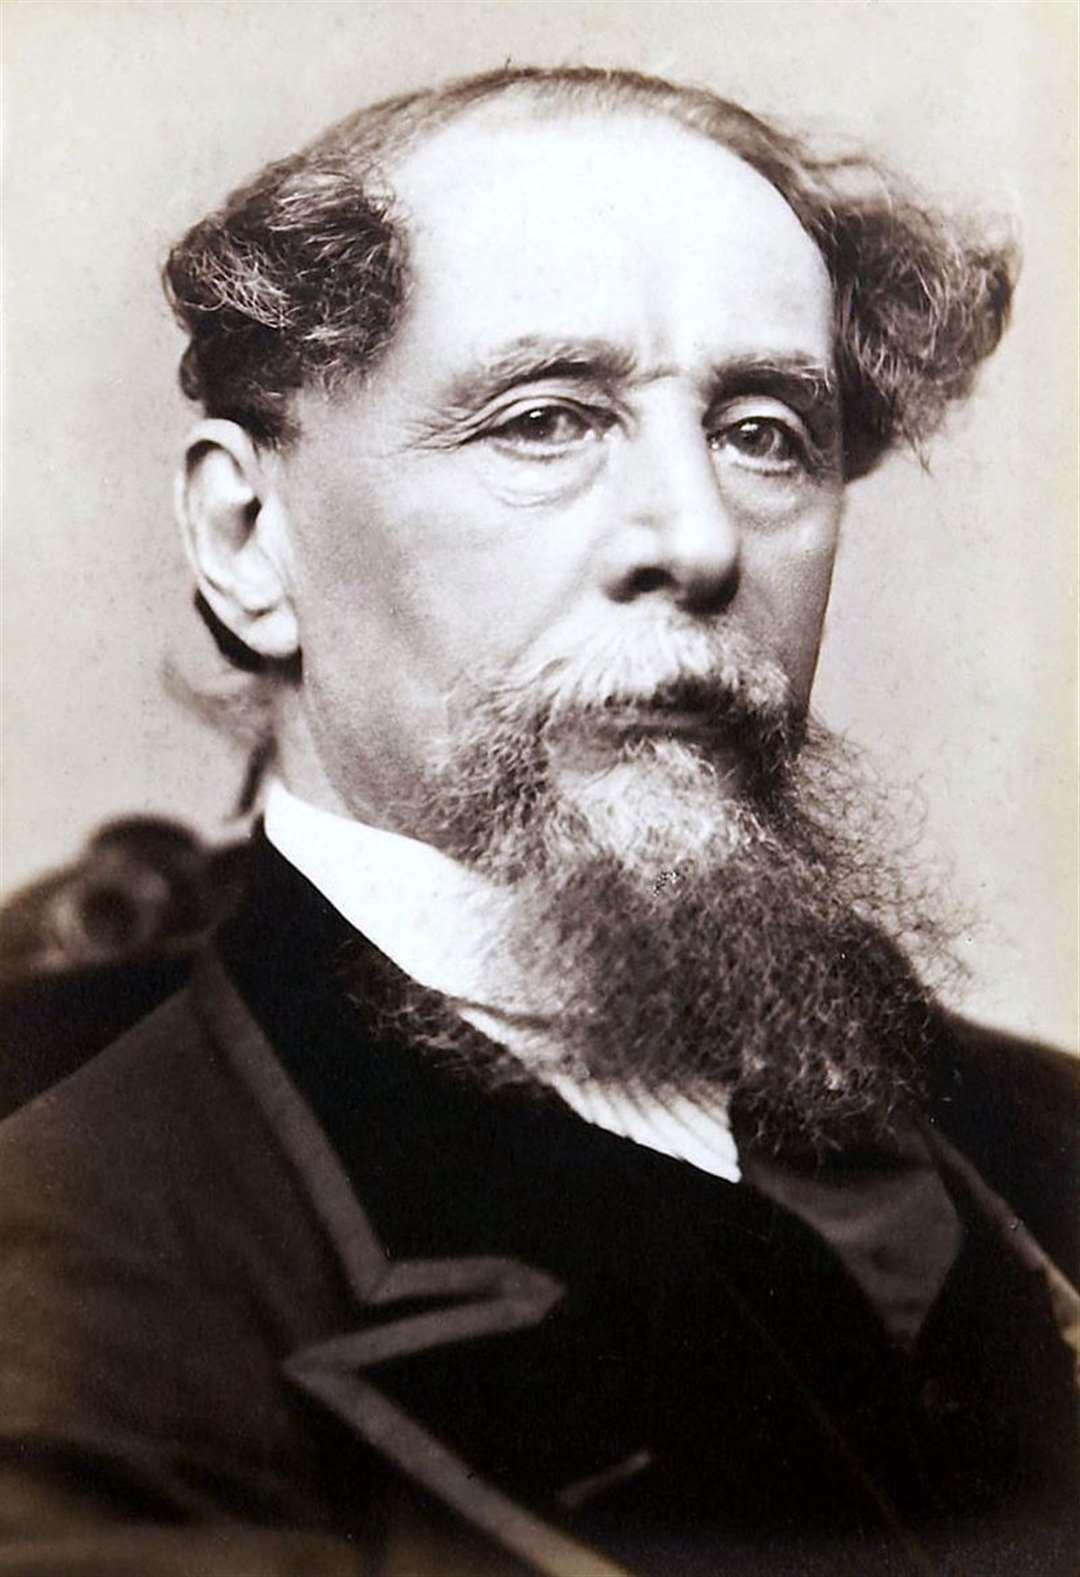 Charles Dickens grew up in Chatham and Rochester